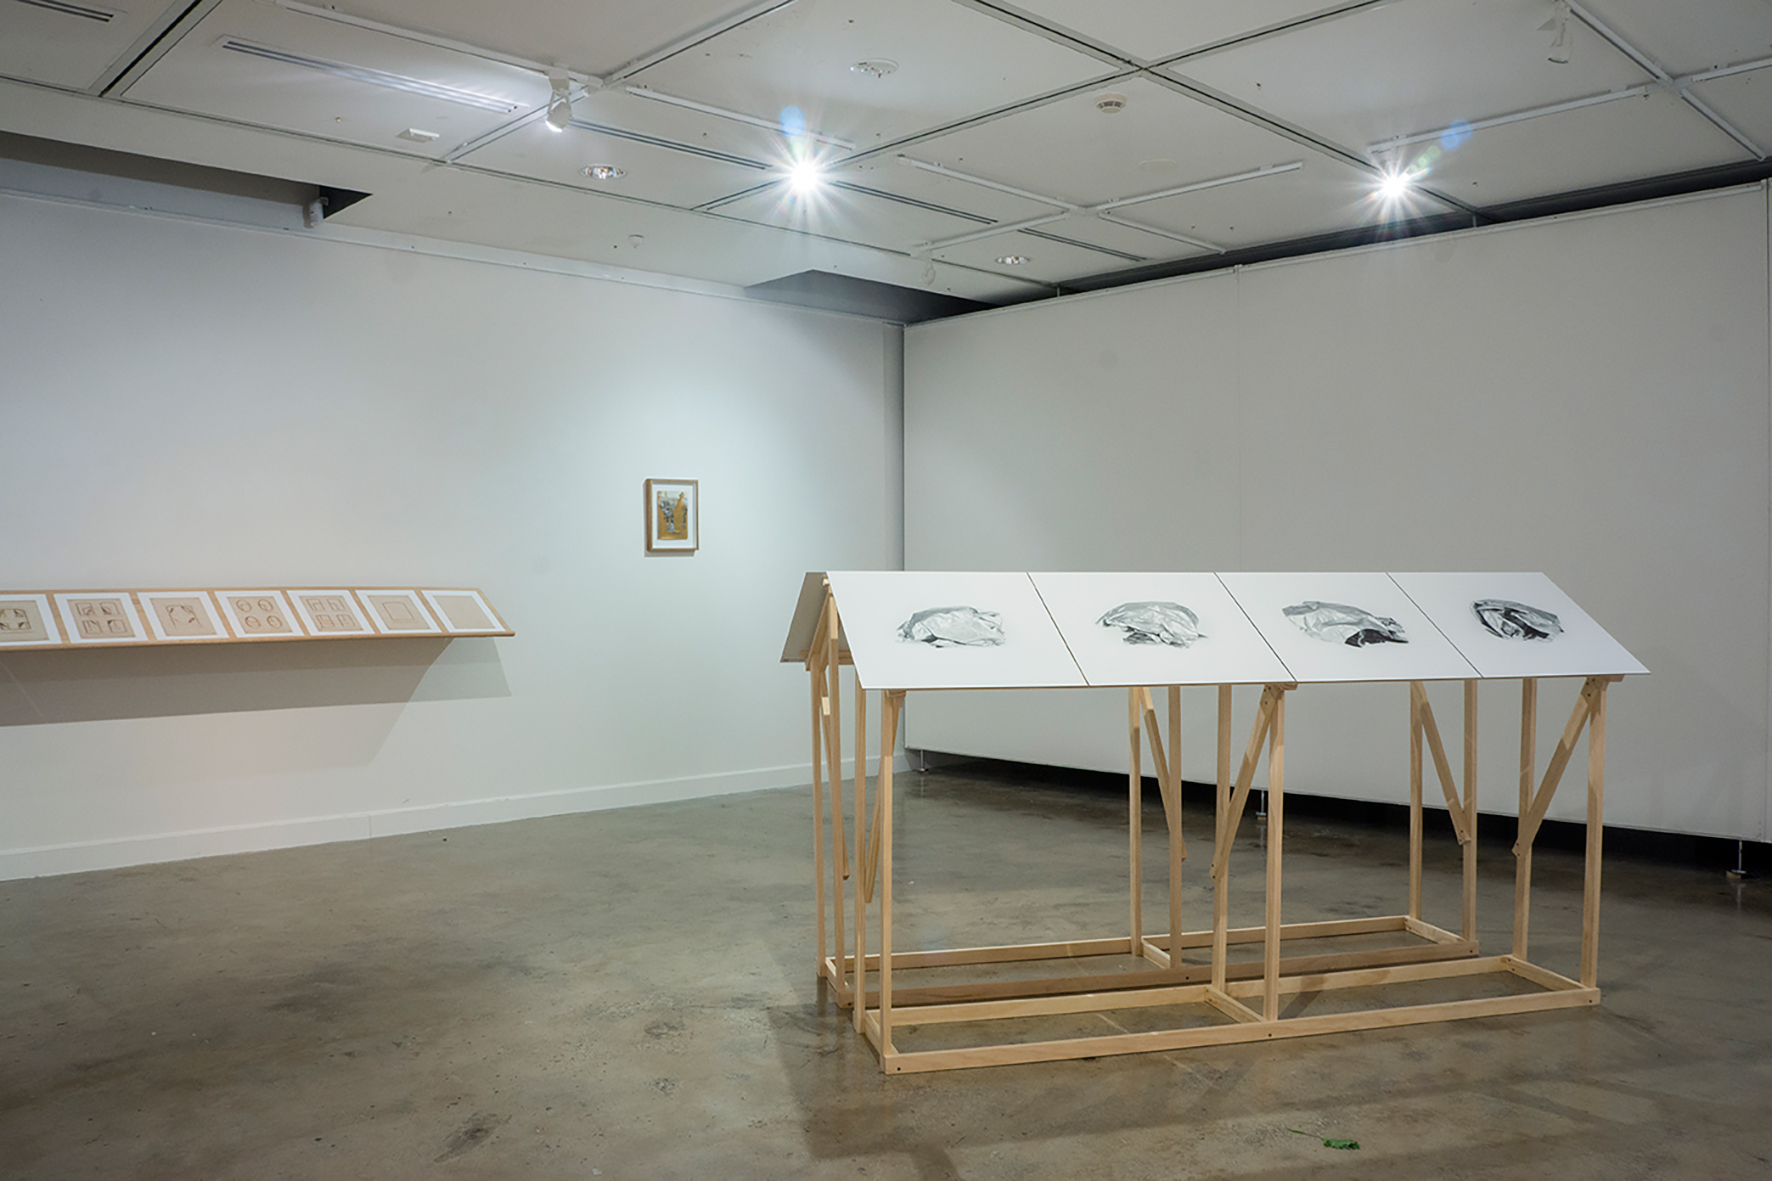    Bringing the distance near   2014  installation view 